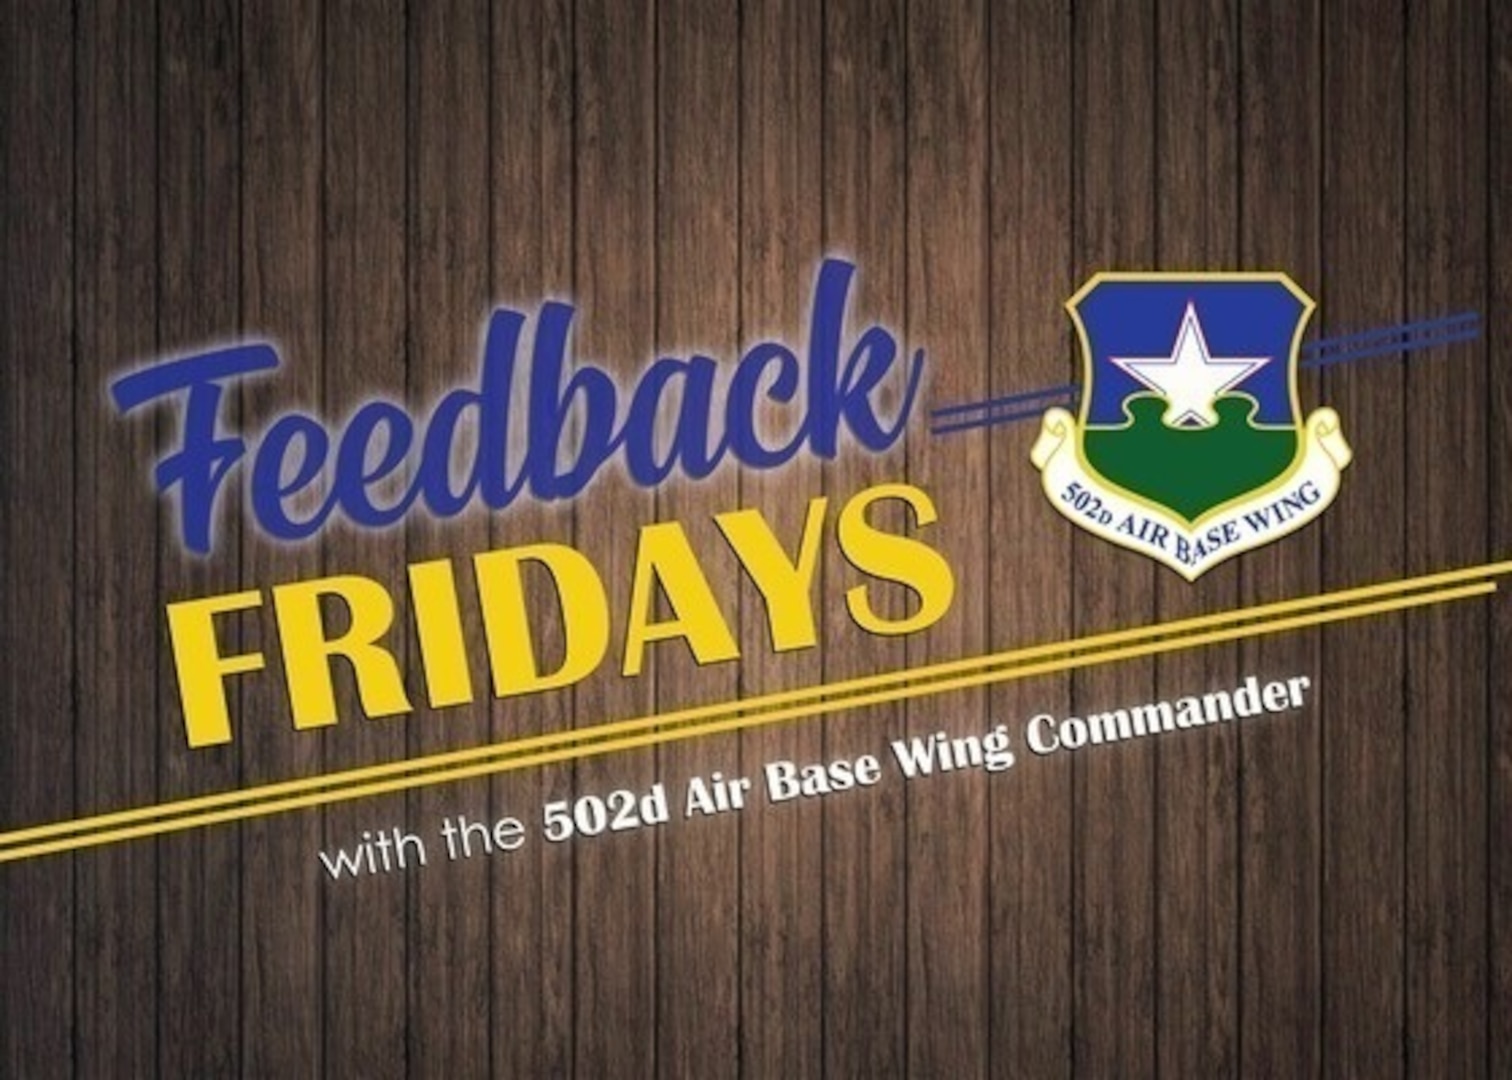 Feedback Fridays is a weekly forum that aims to connect the 502d Air Base Wing with members of the Joint Base San Antonio community.